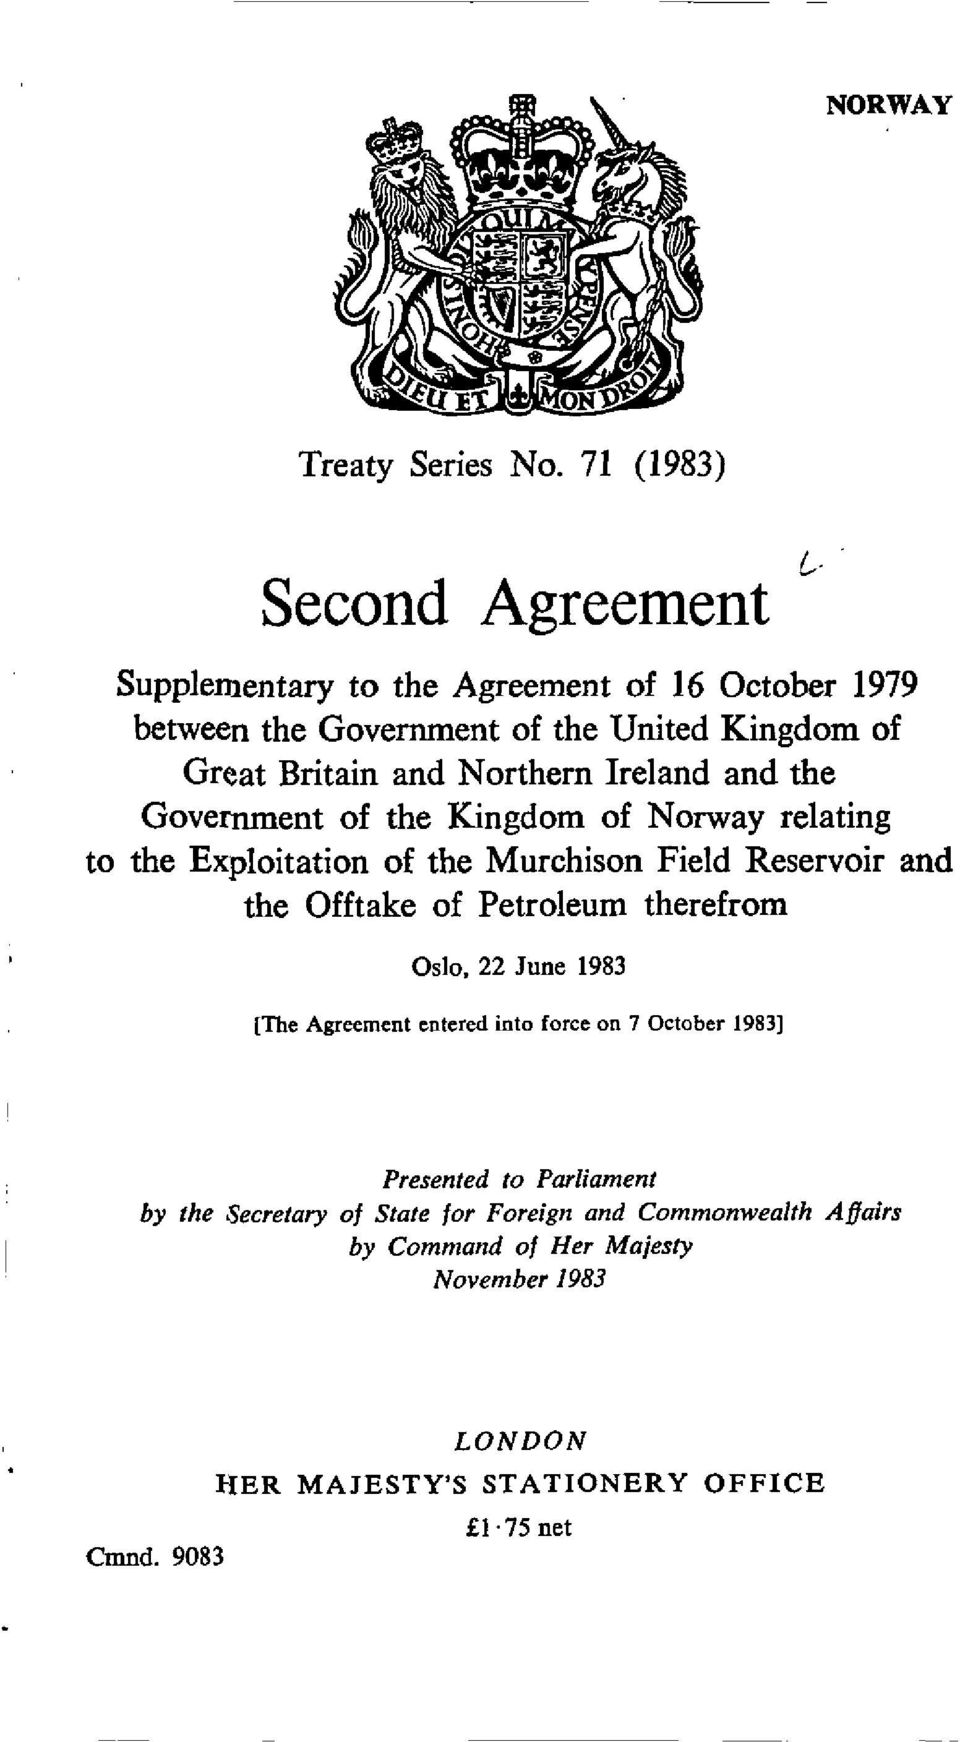 Northern Ireland and the Government of the Kingdom of Norway relating to the Exploitation of the Murchison Field Reservoir and the Offtake of